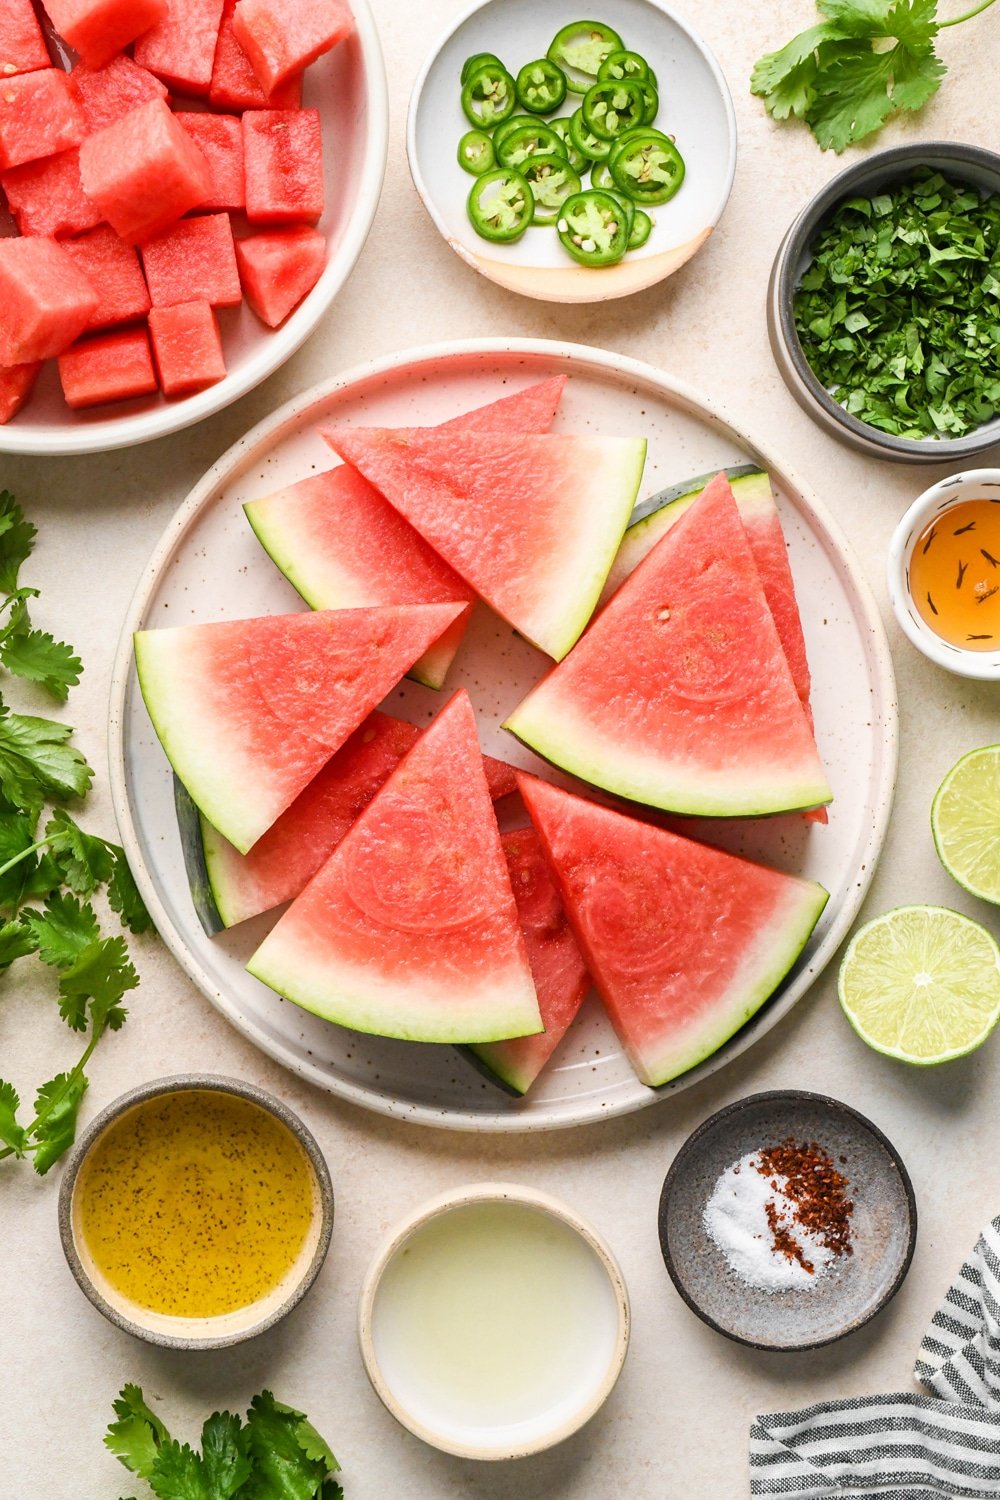 Ingredients for spicy watermelon salad on various ceramics, on a light cream colored background.